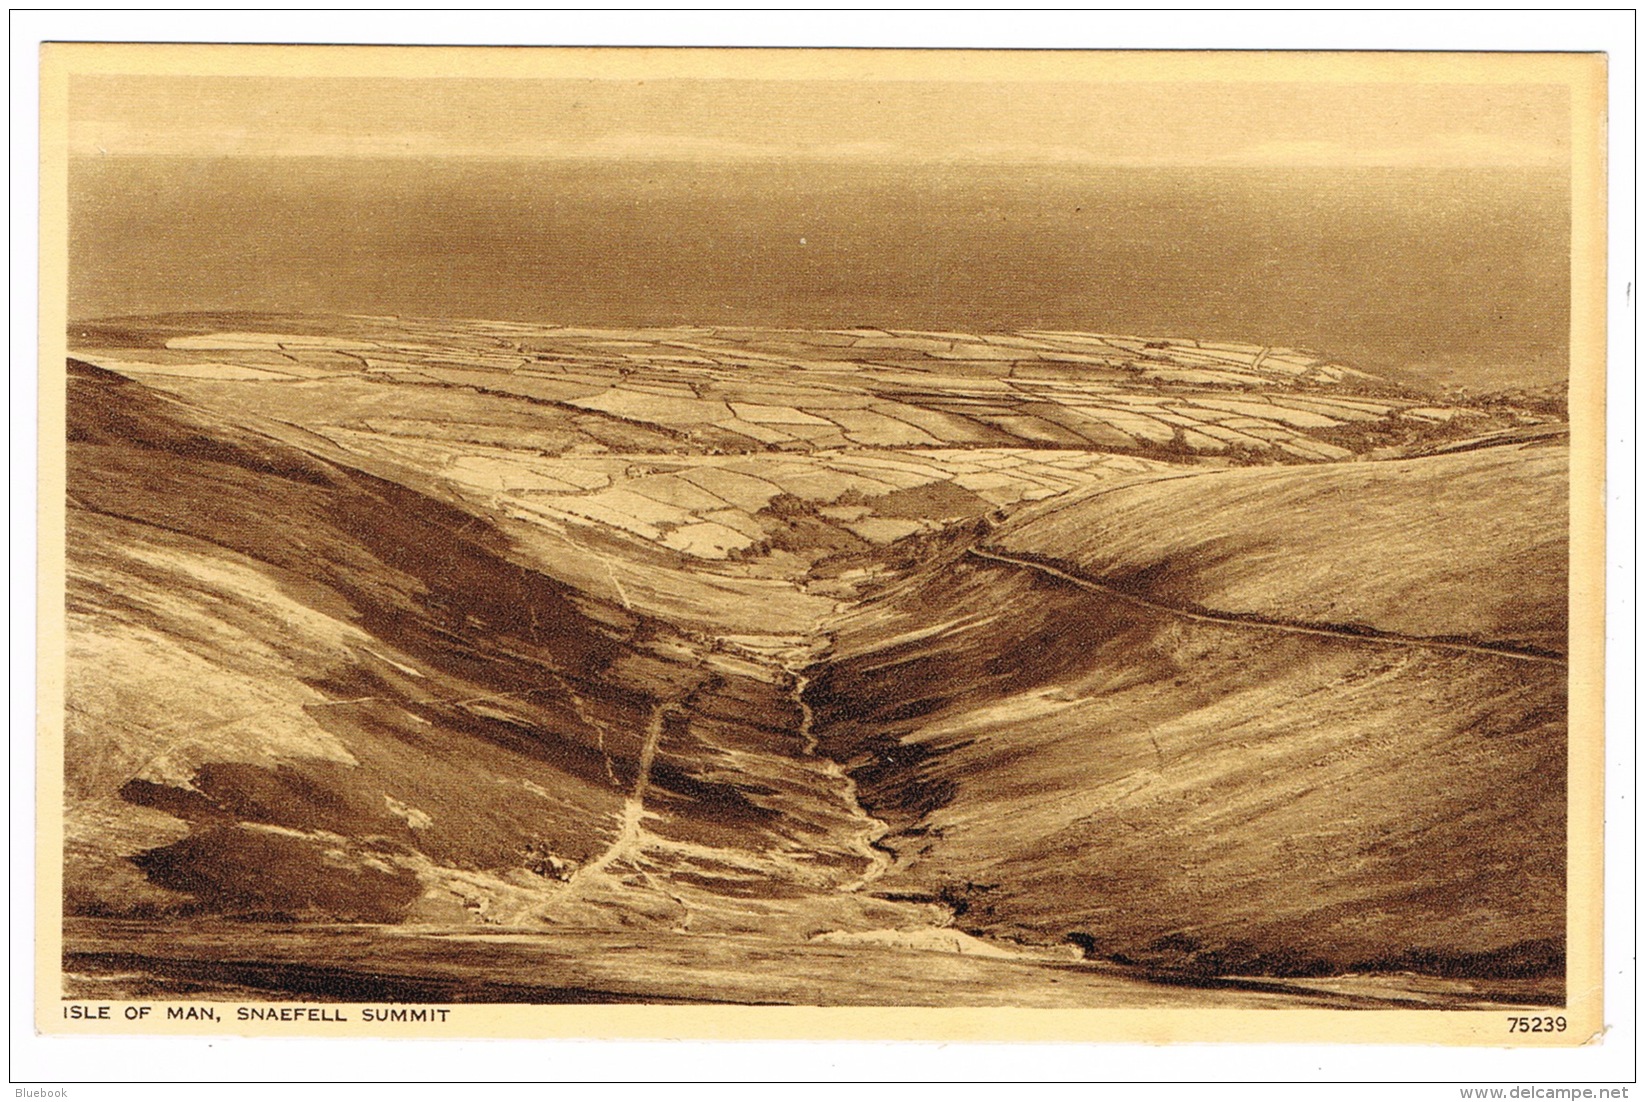 RB 1129 - Postcard - Looking Down From Snaefell Summit - Isle Of Man - Ile De Man